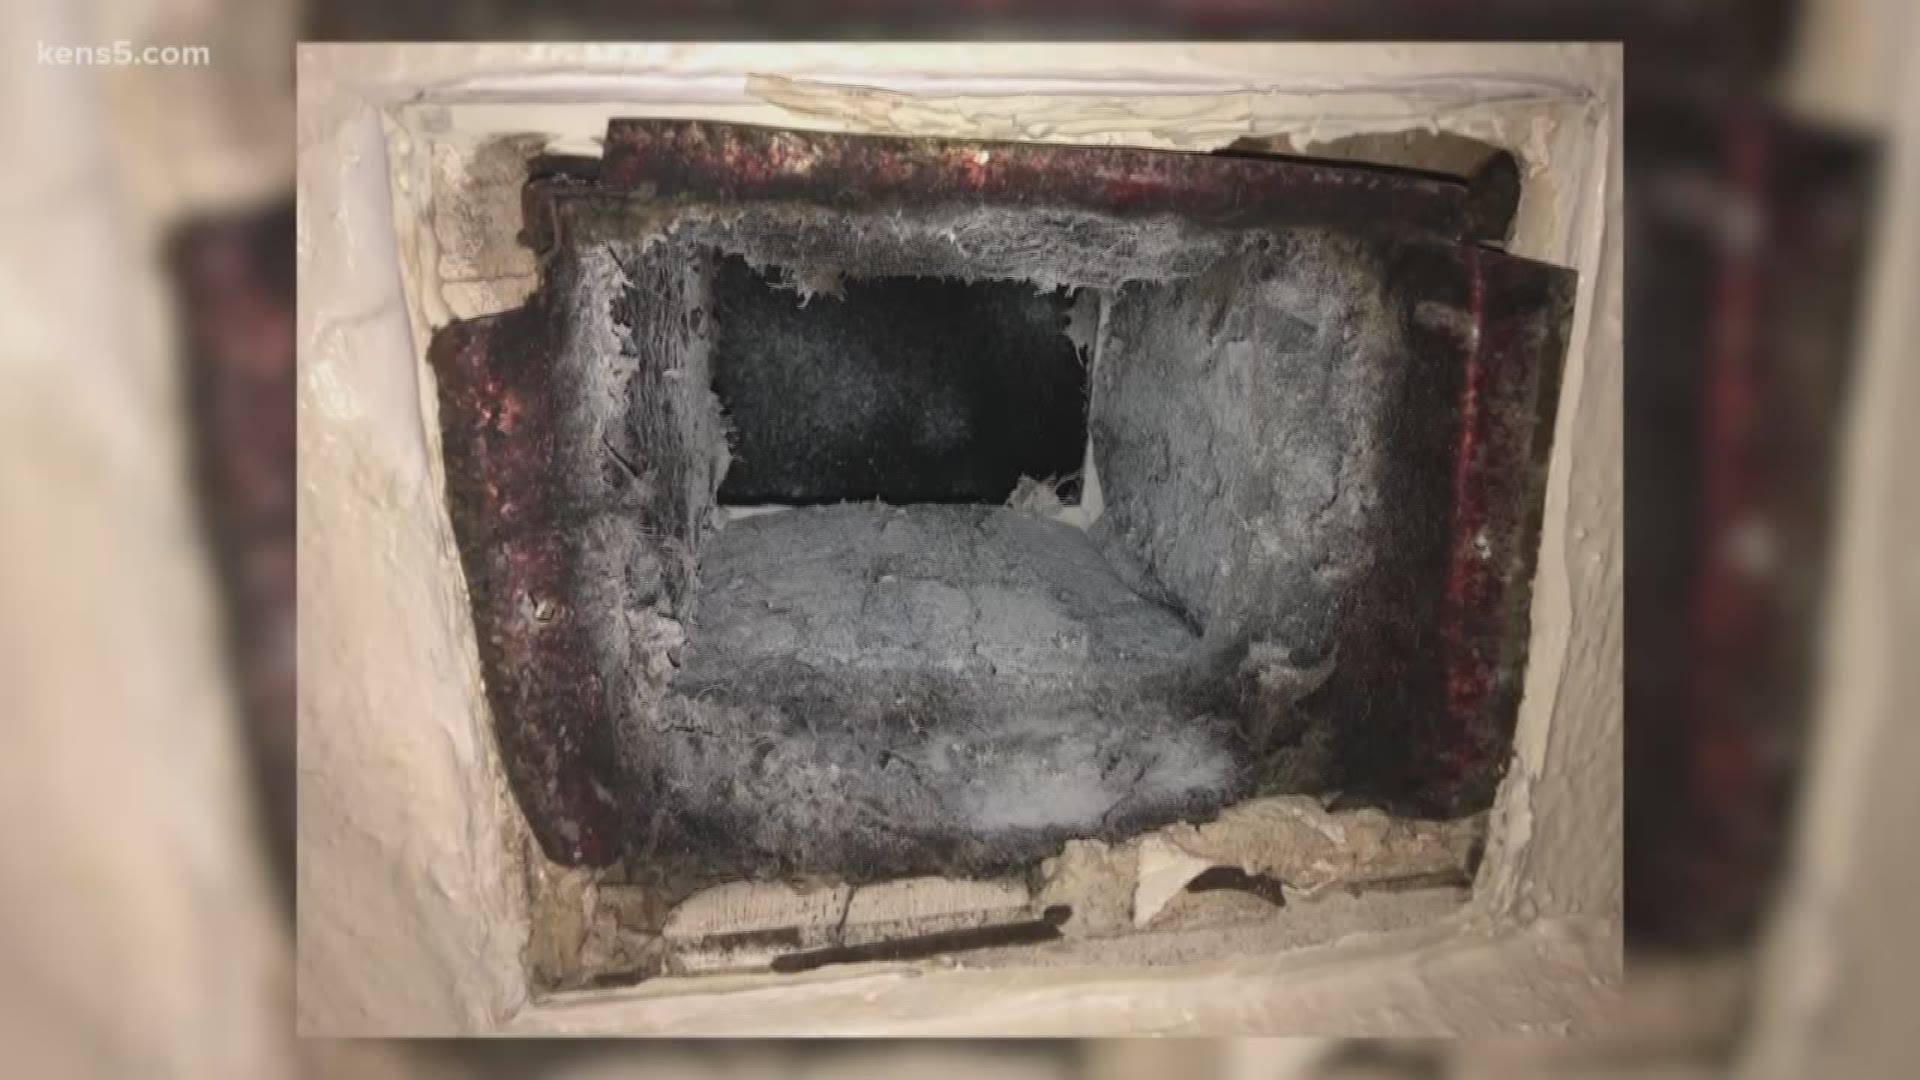 Earlier this year, KENS 5 began shedding light on the mold and water damage plaguing some local military communities. Now, some families are suing.